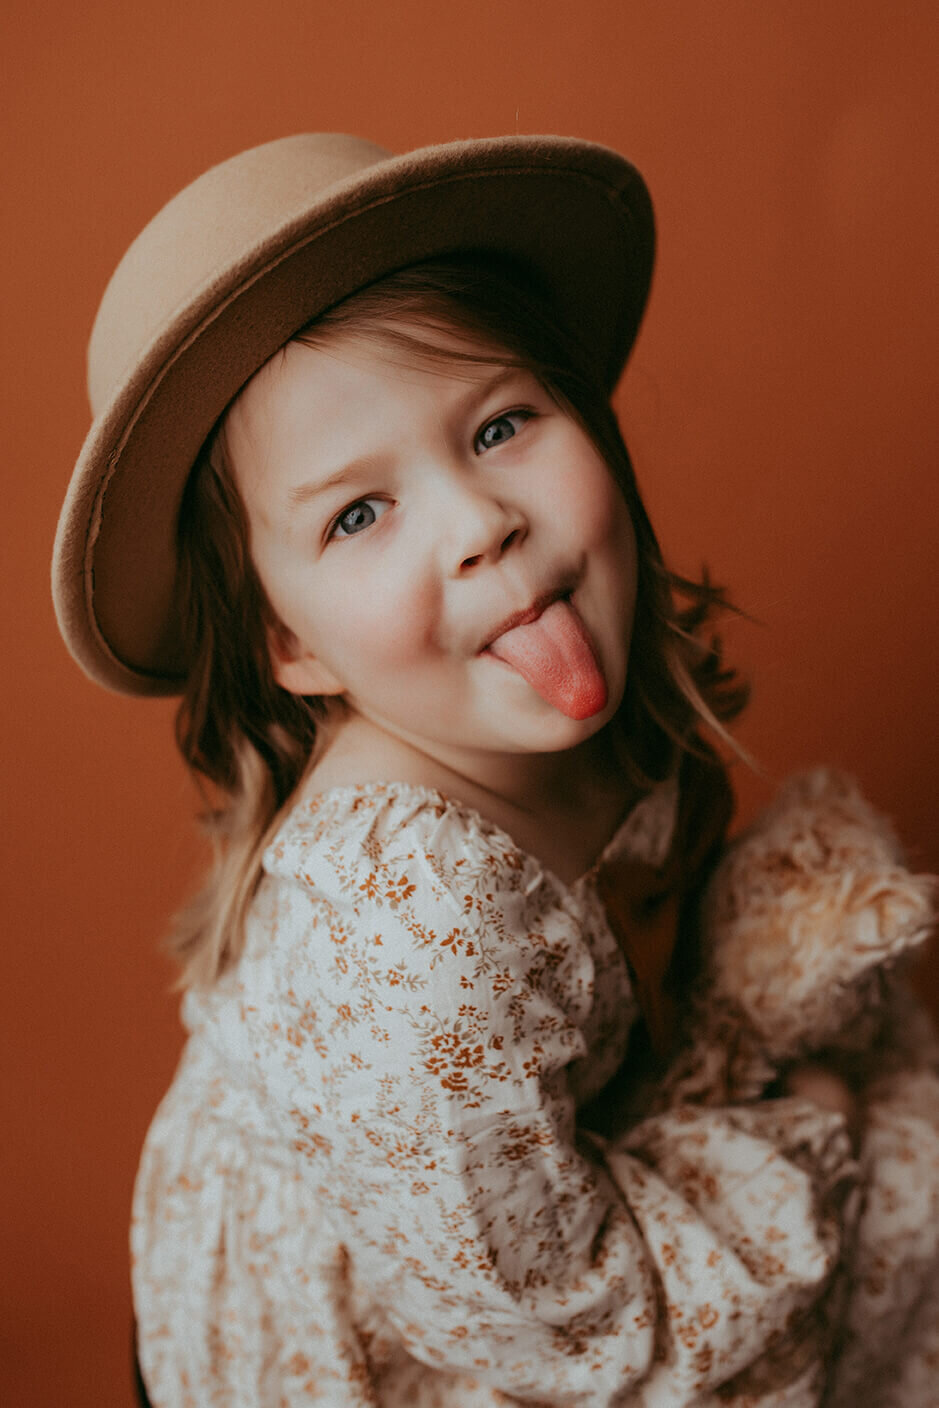 Girl sticking tongue out on brown backdrop